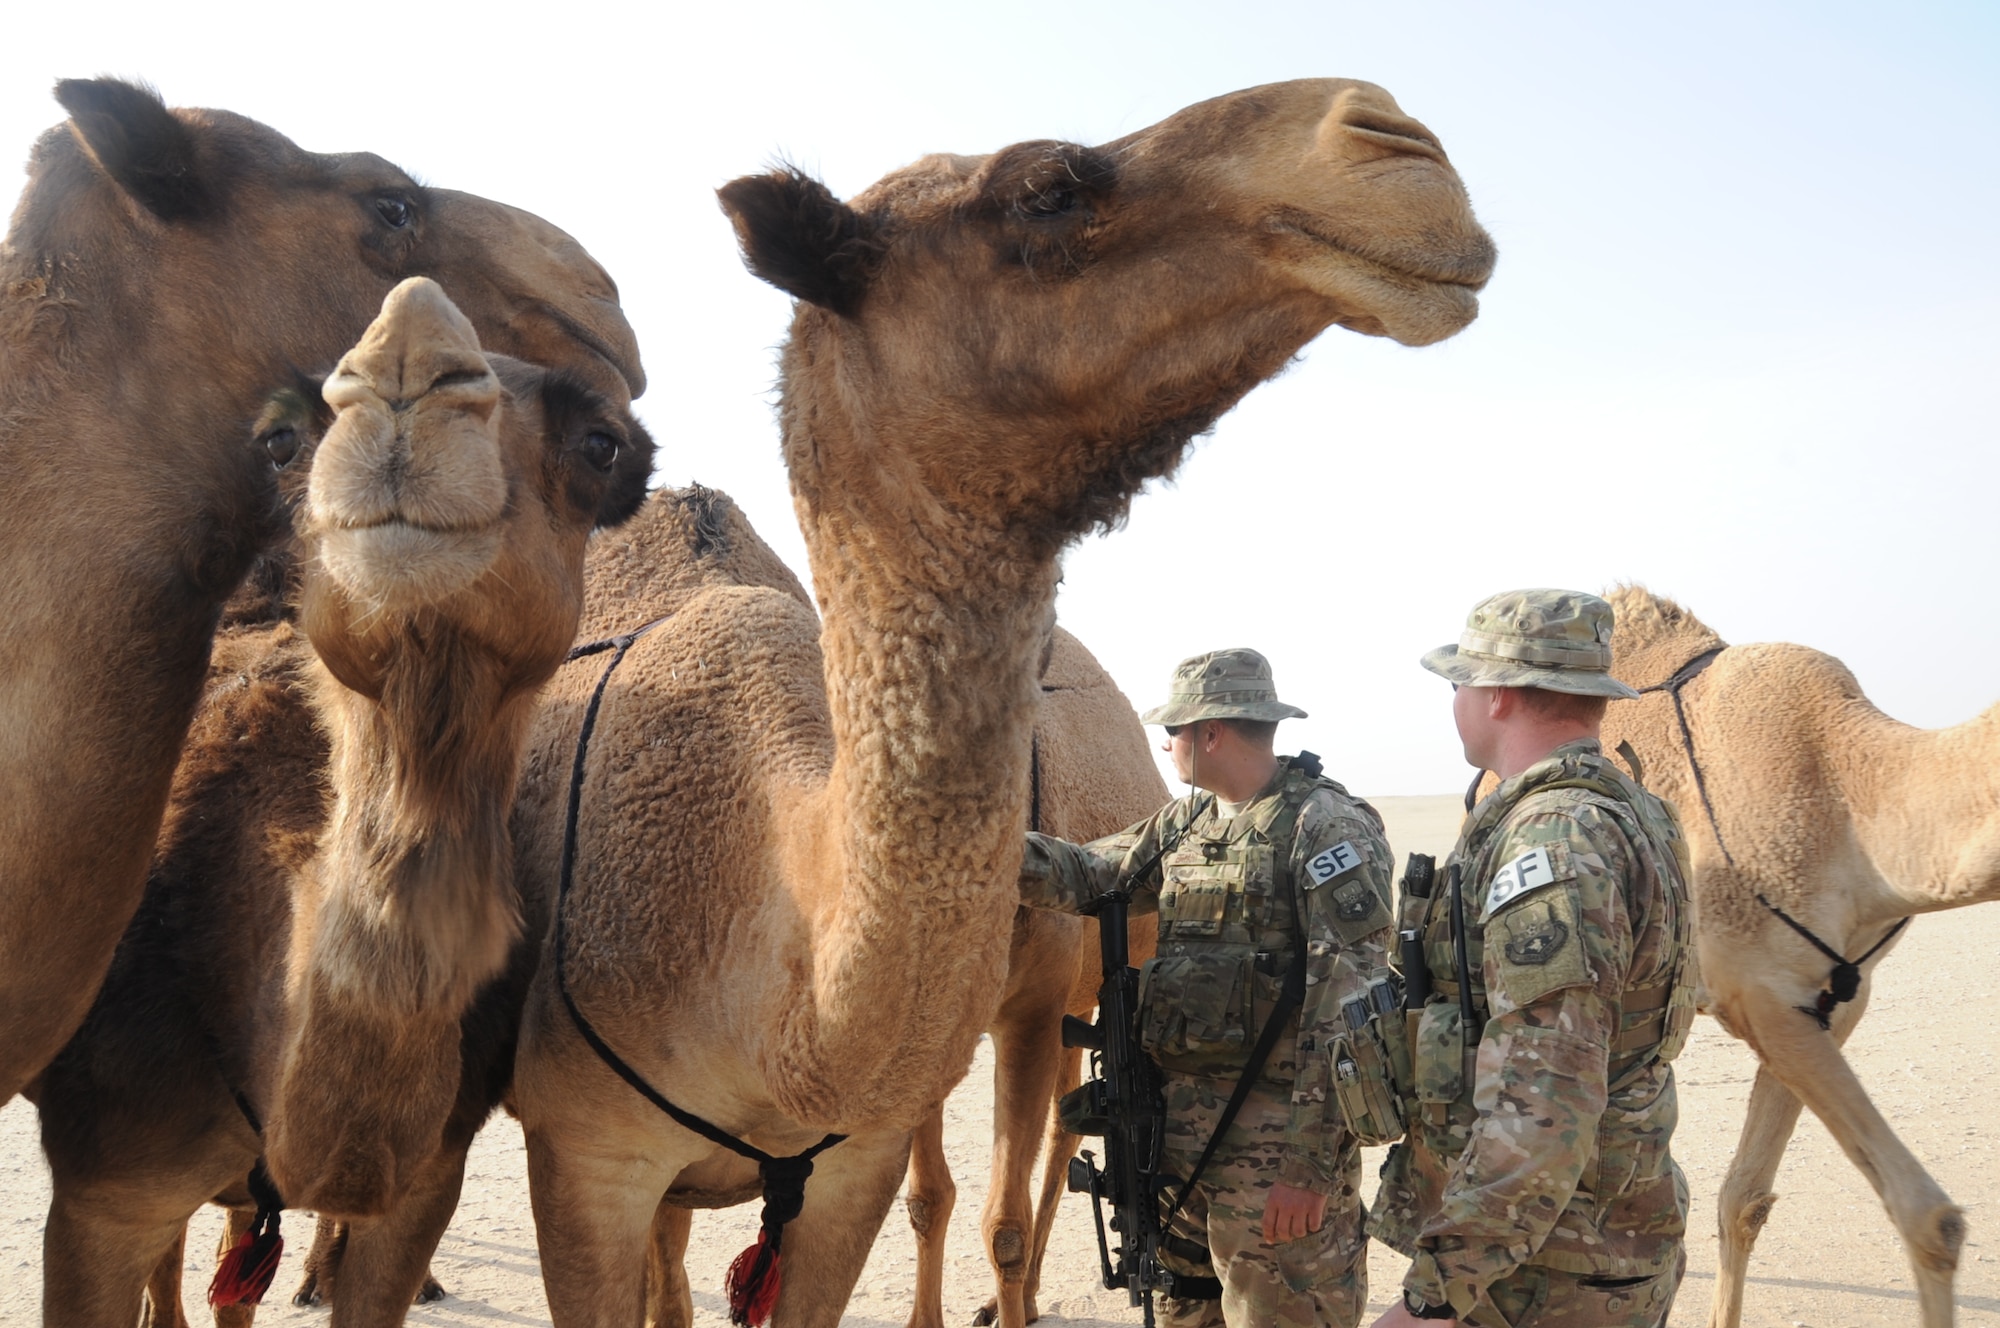 Senior Airmen Grayson Bryant, left, and Senior Airman Rhea Flambeau, right, 386th Expeditionary Security Forces Squadron patrolmen, encounter a heard of camels during a patrol of the base security zone at an undisclosed location in Southwest Asia Jan. 1, 2017. Both of these Airmen are part of the base security zone patrol team. (U.S. Air Force photo/Tech. Sgt. Kenneth McCann)